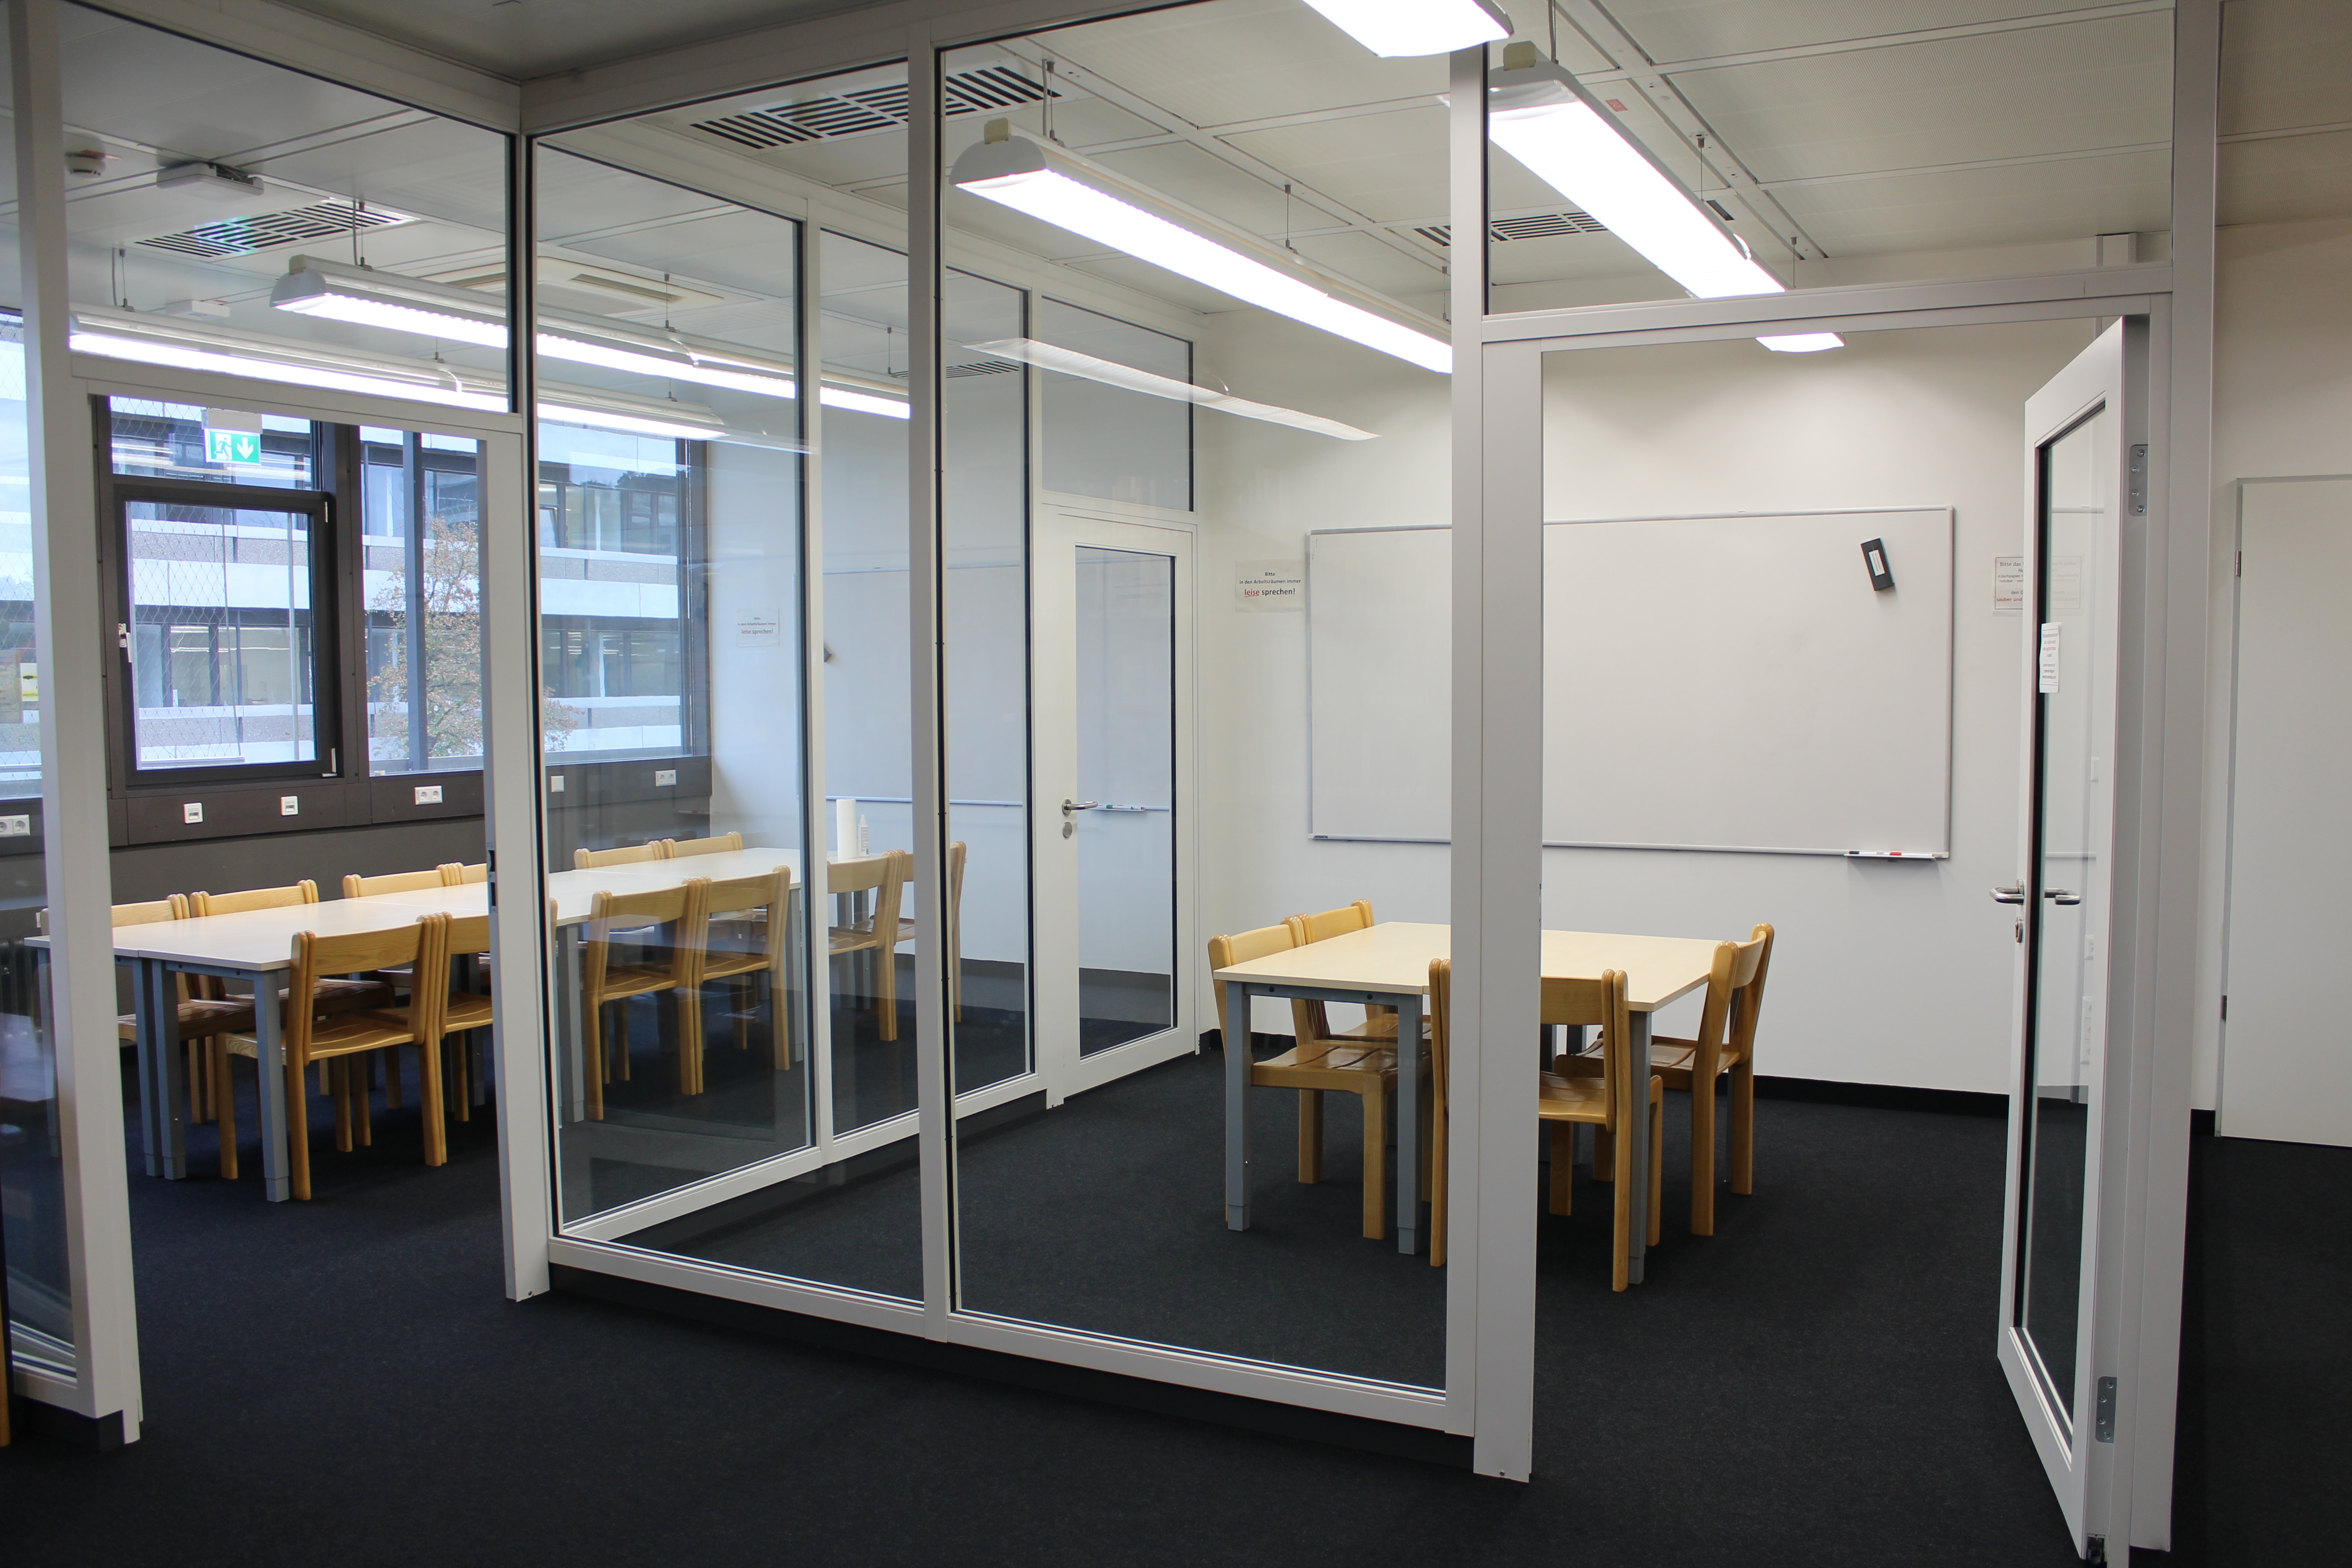 Two group rooms within the library are separated from the rest of the room by glass walls. There are tables, chairs and a whiteboard in each room.